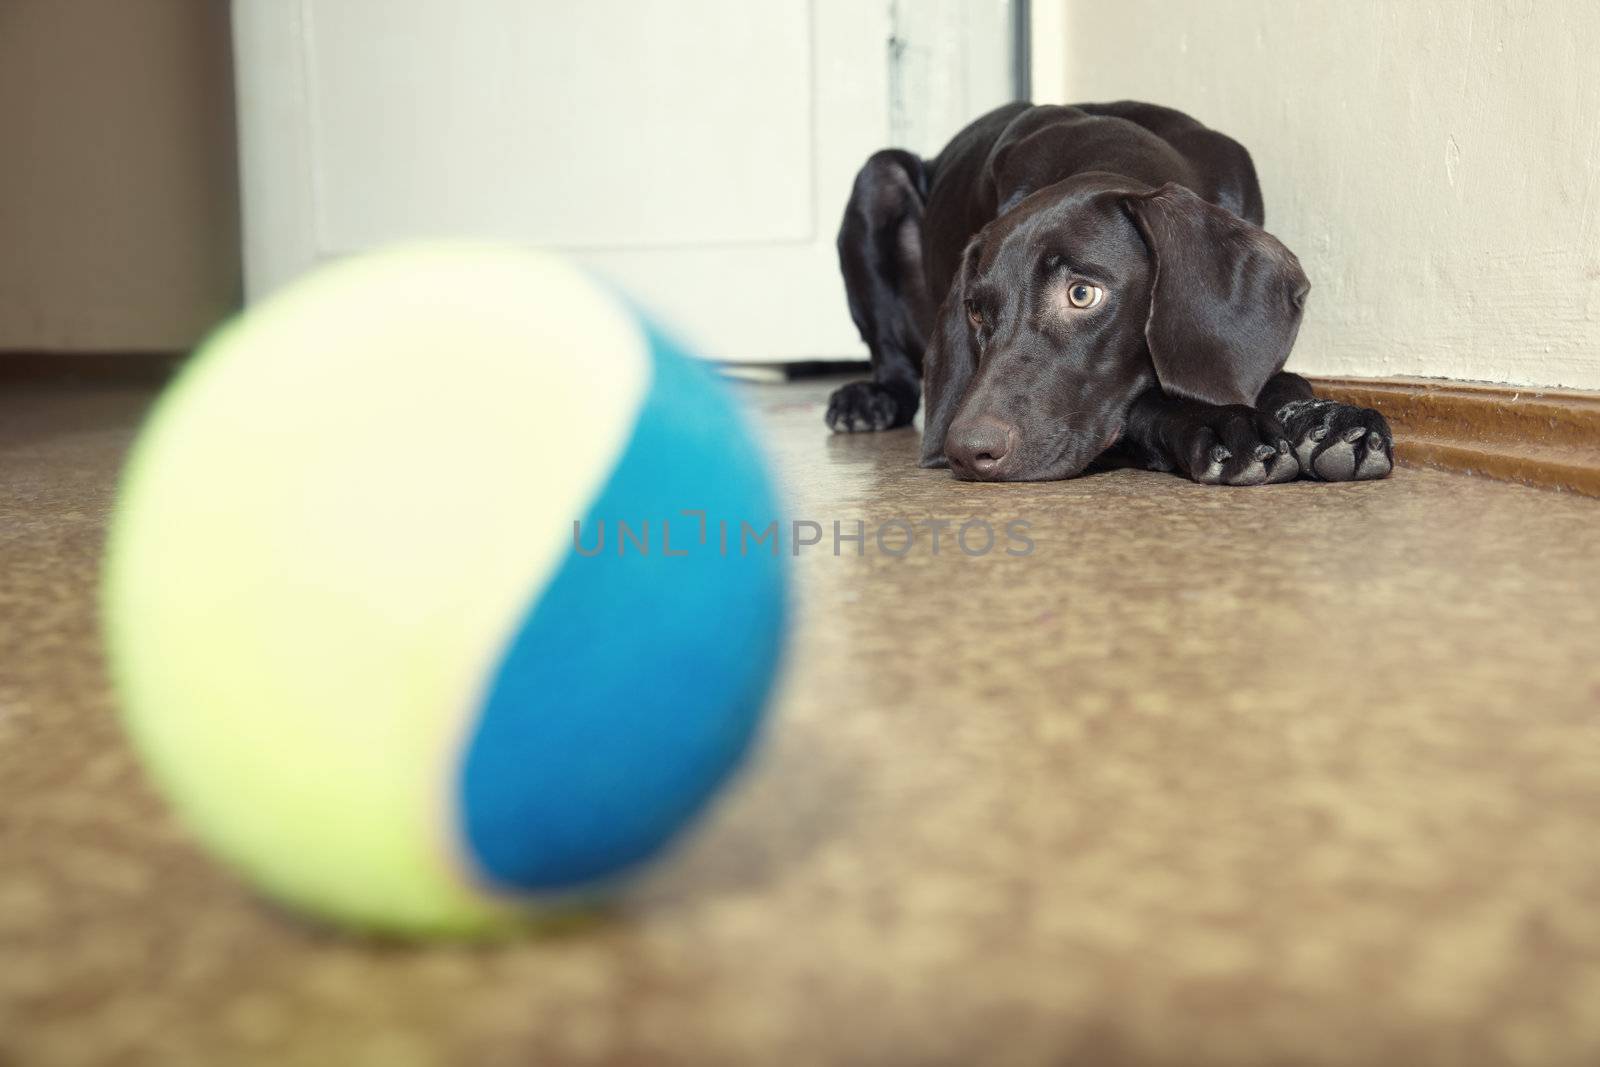 Dog and ball by Novic